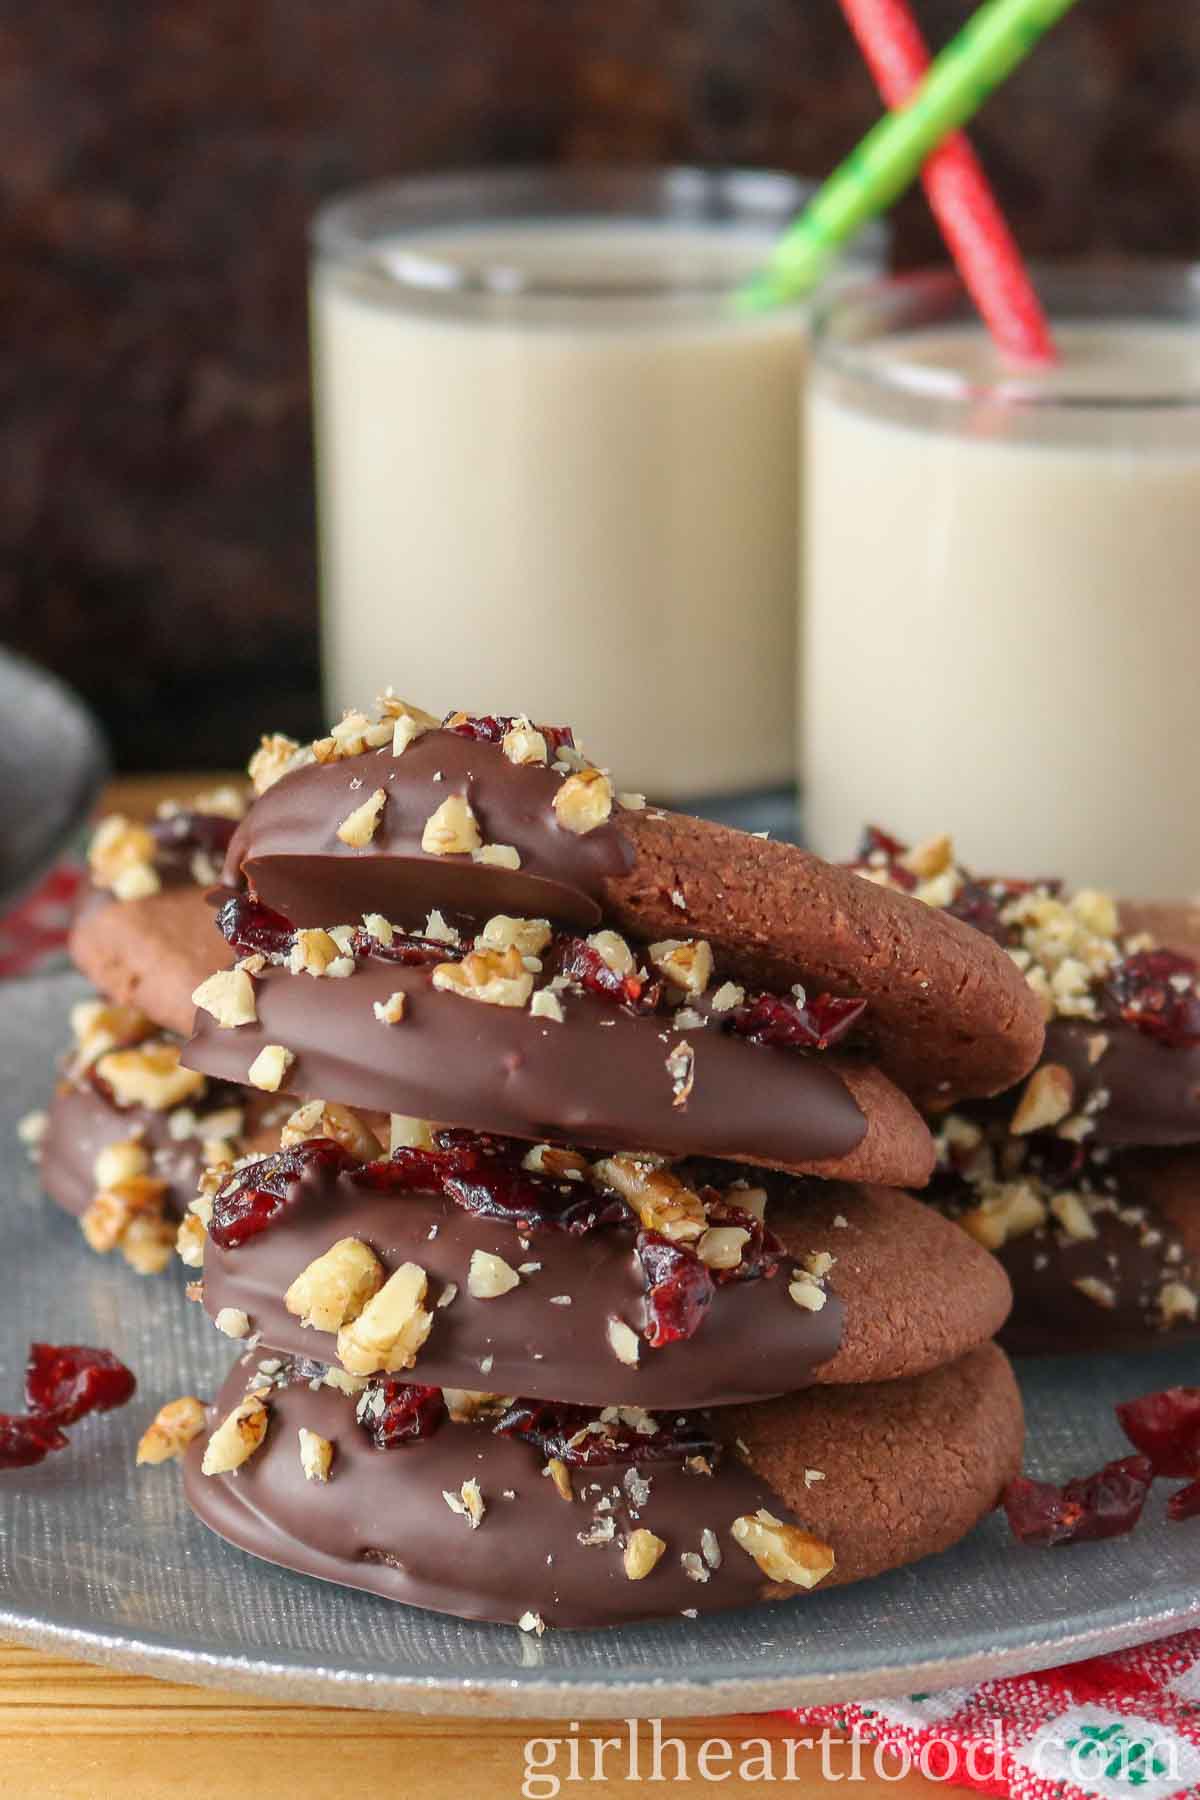 chocolate shortbread cookies with dark chocolate cranberries and walnuts from girl heart food